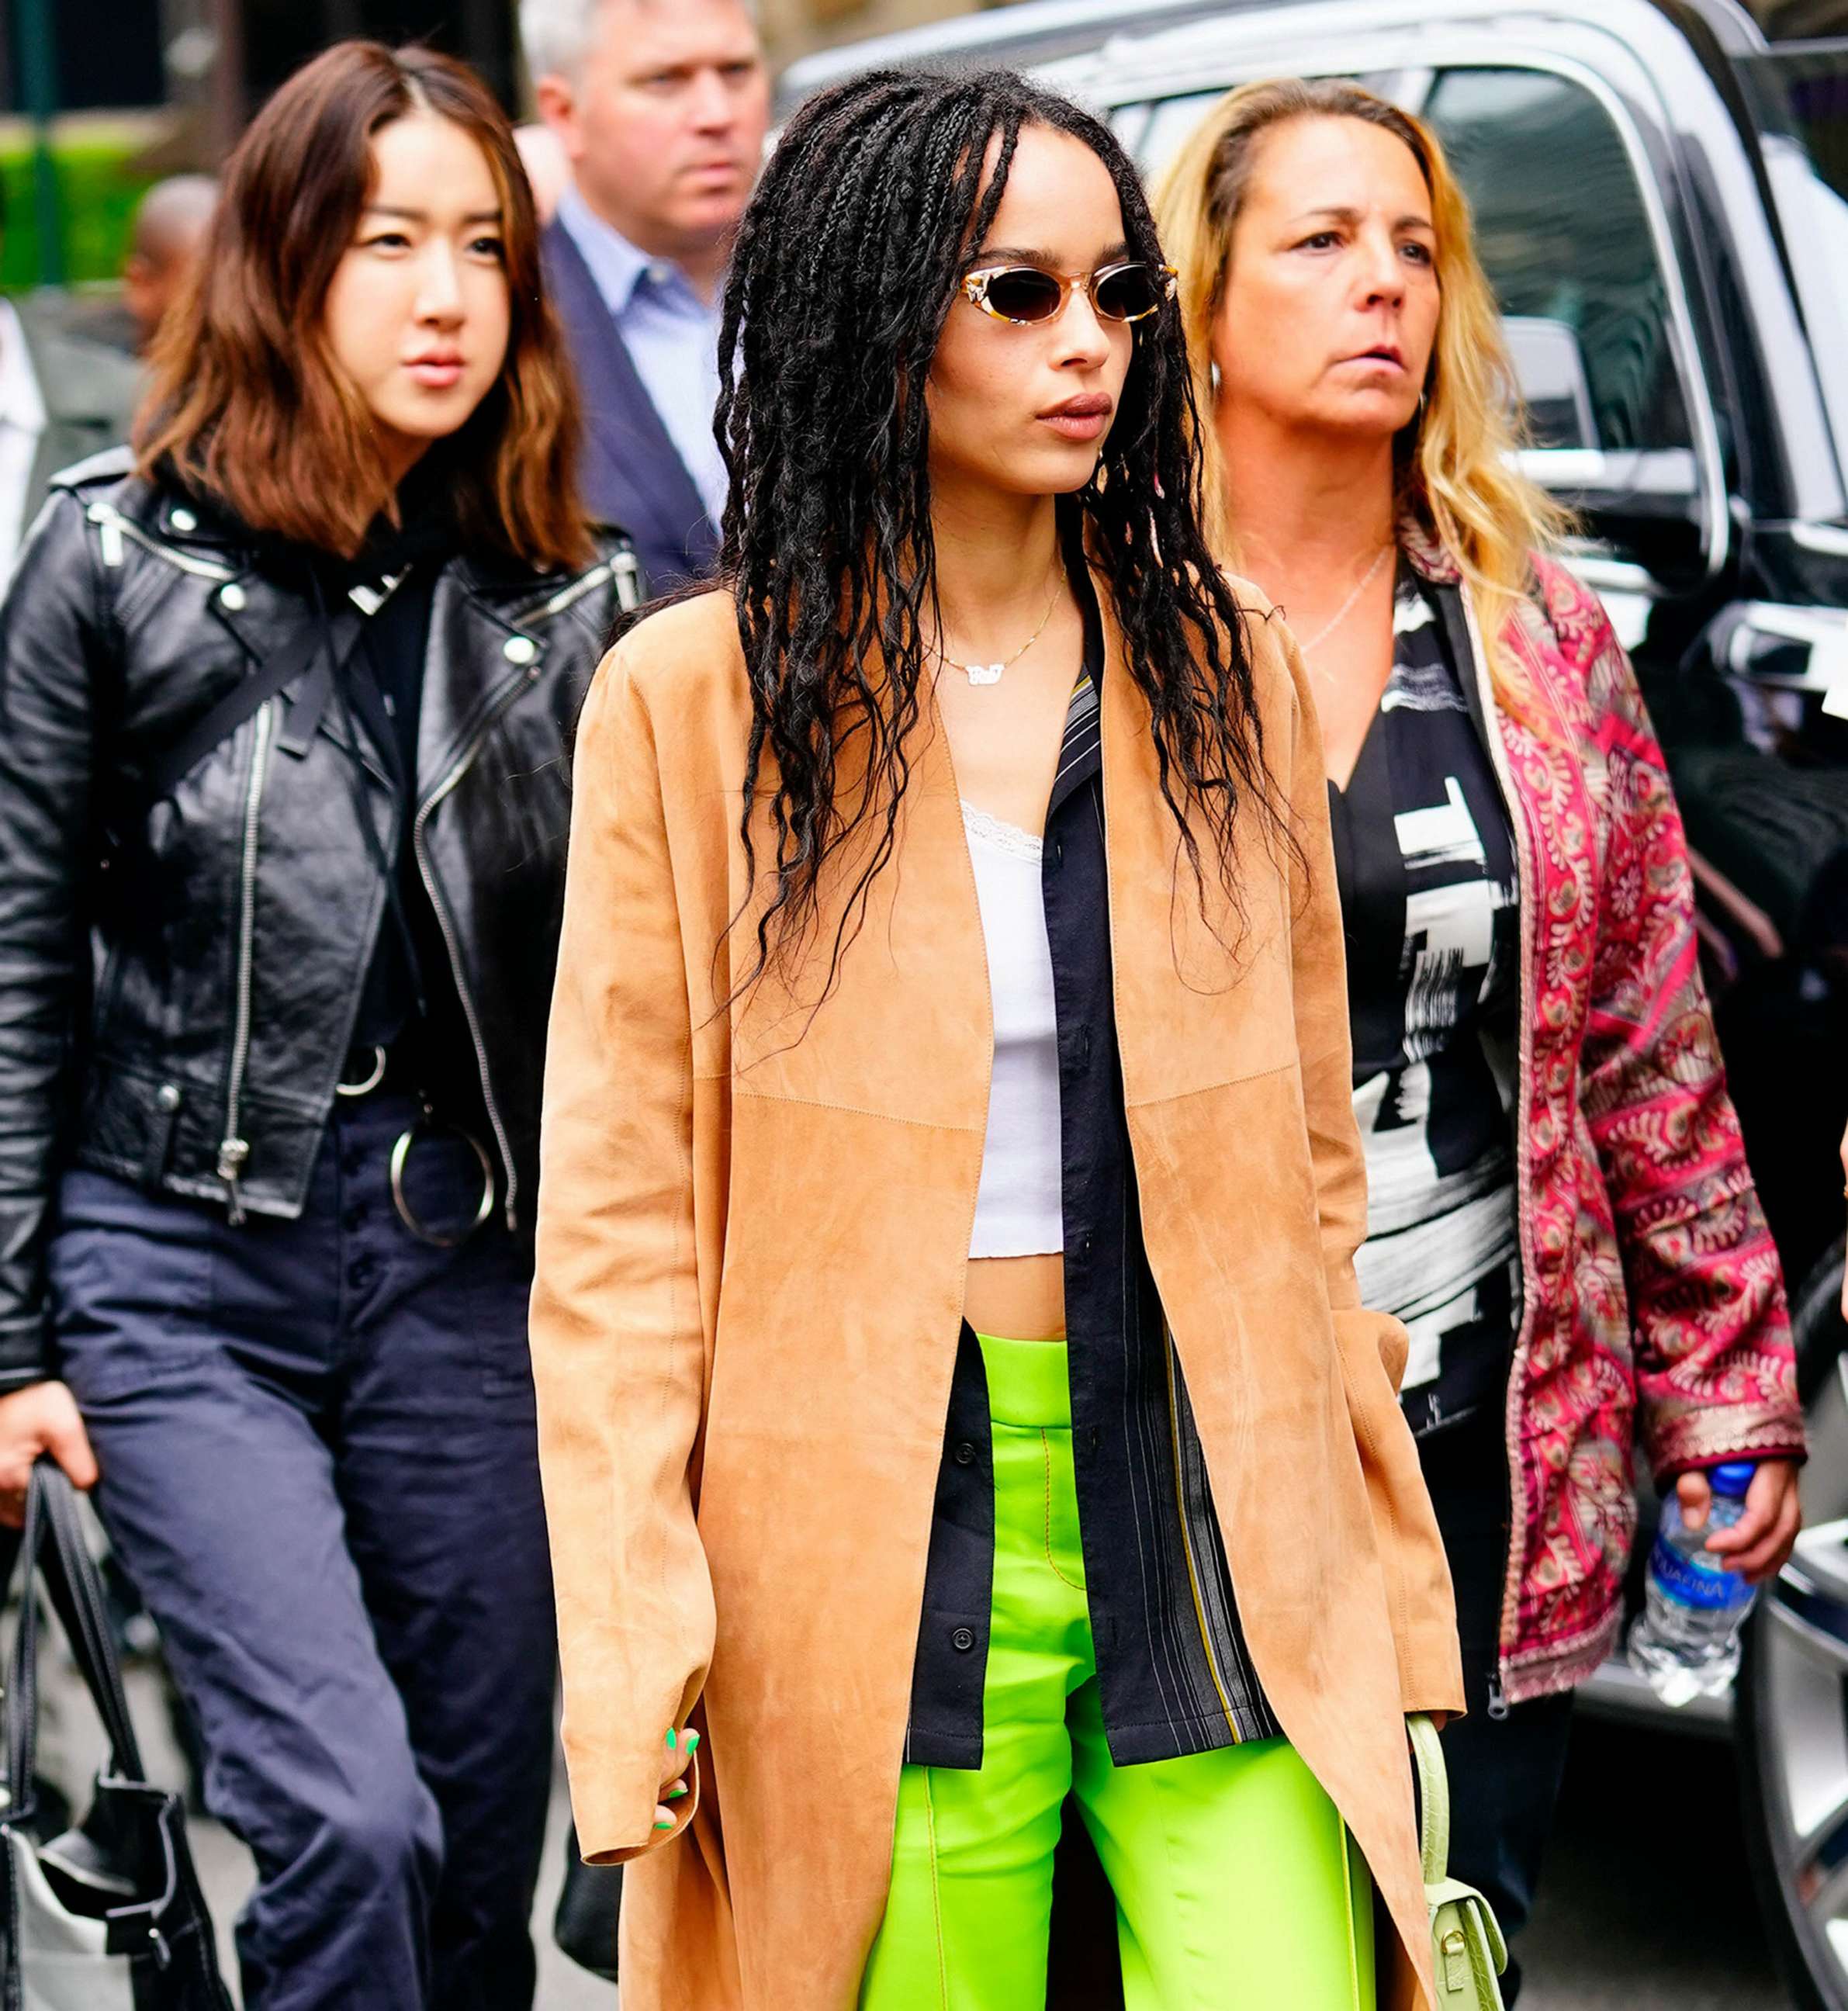 PHOTO: In this May 1, 2019, file photo, Zoe Kravitz is seen at Hulu Upfronts in New York.